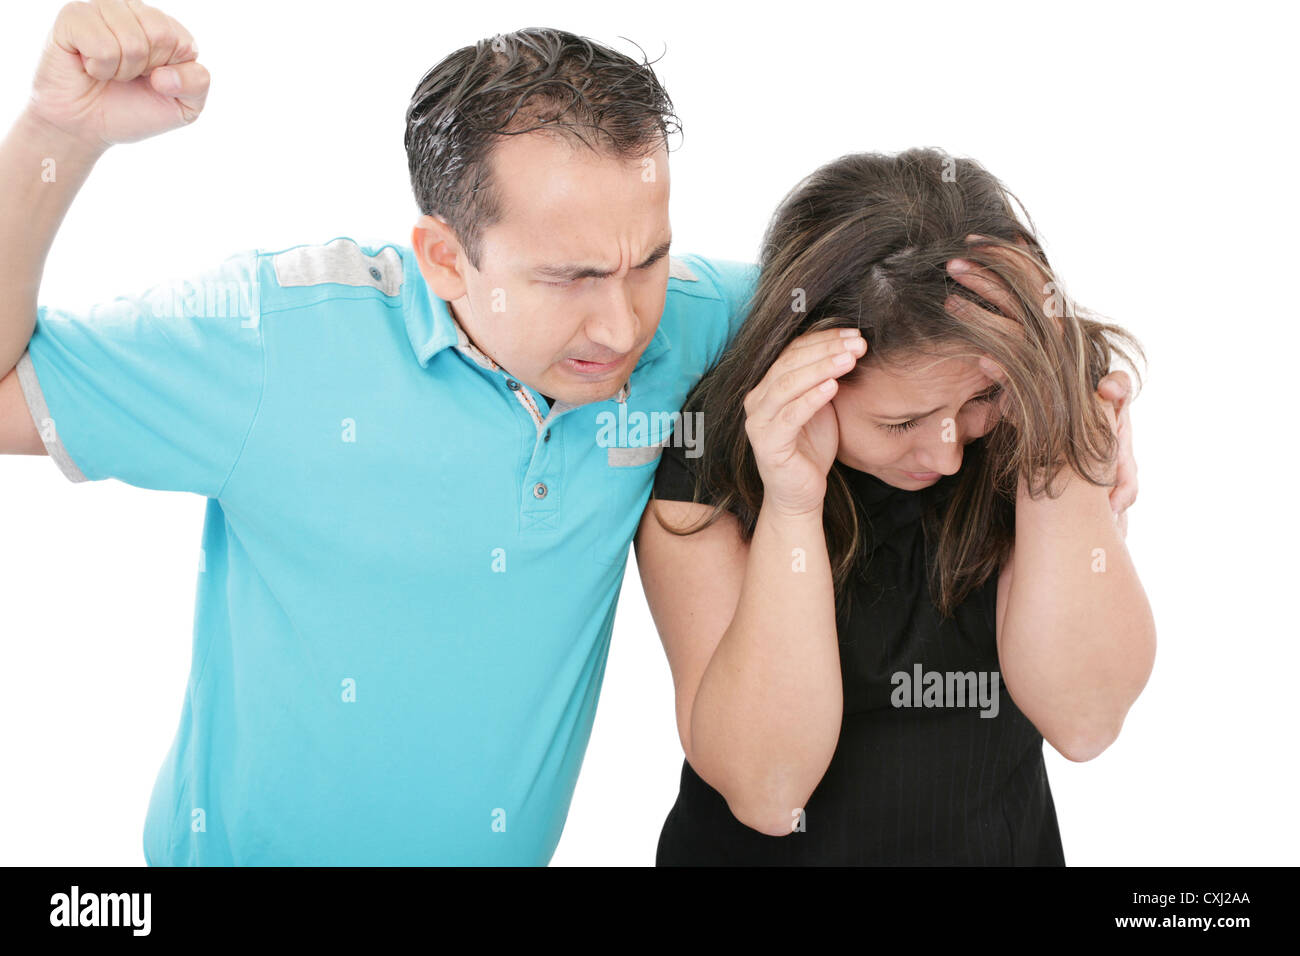 Terrified abused woman trying to stop the attack and defend herself, Stock Photo